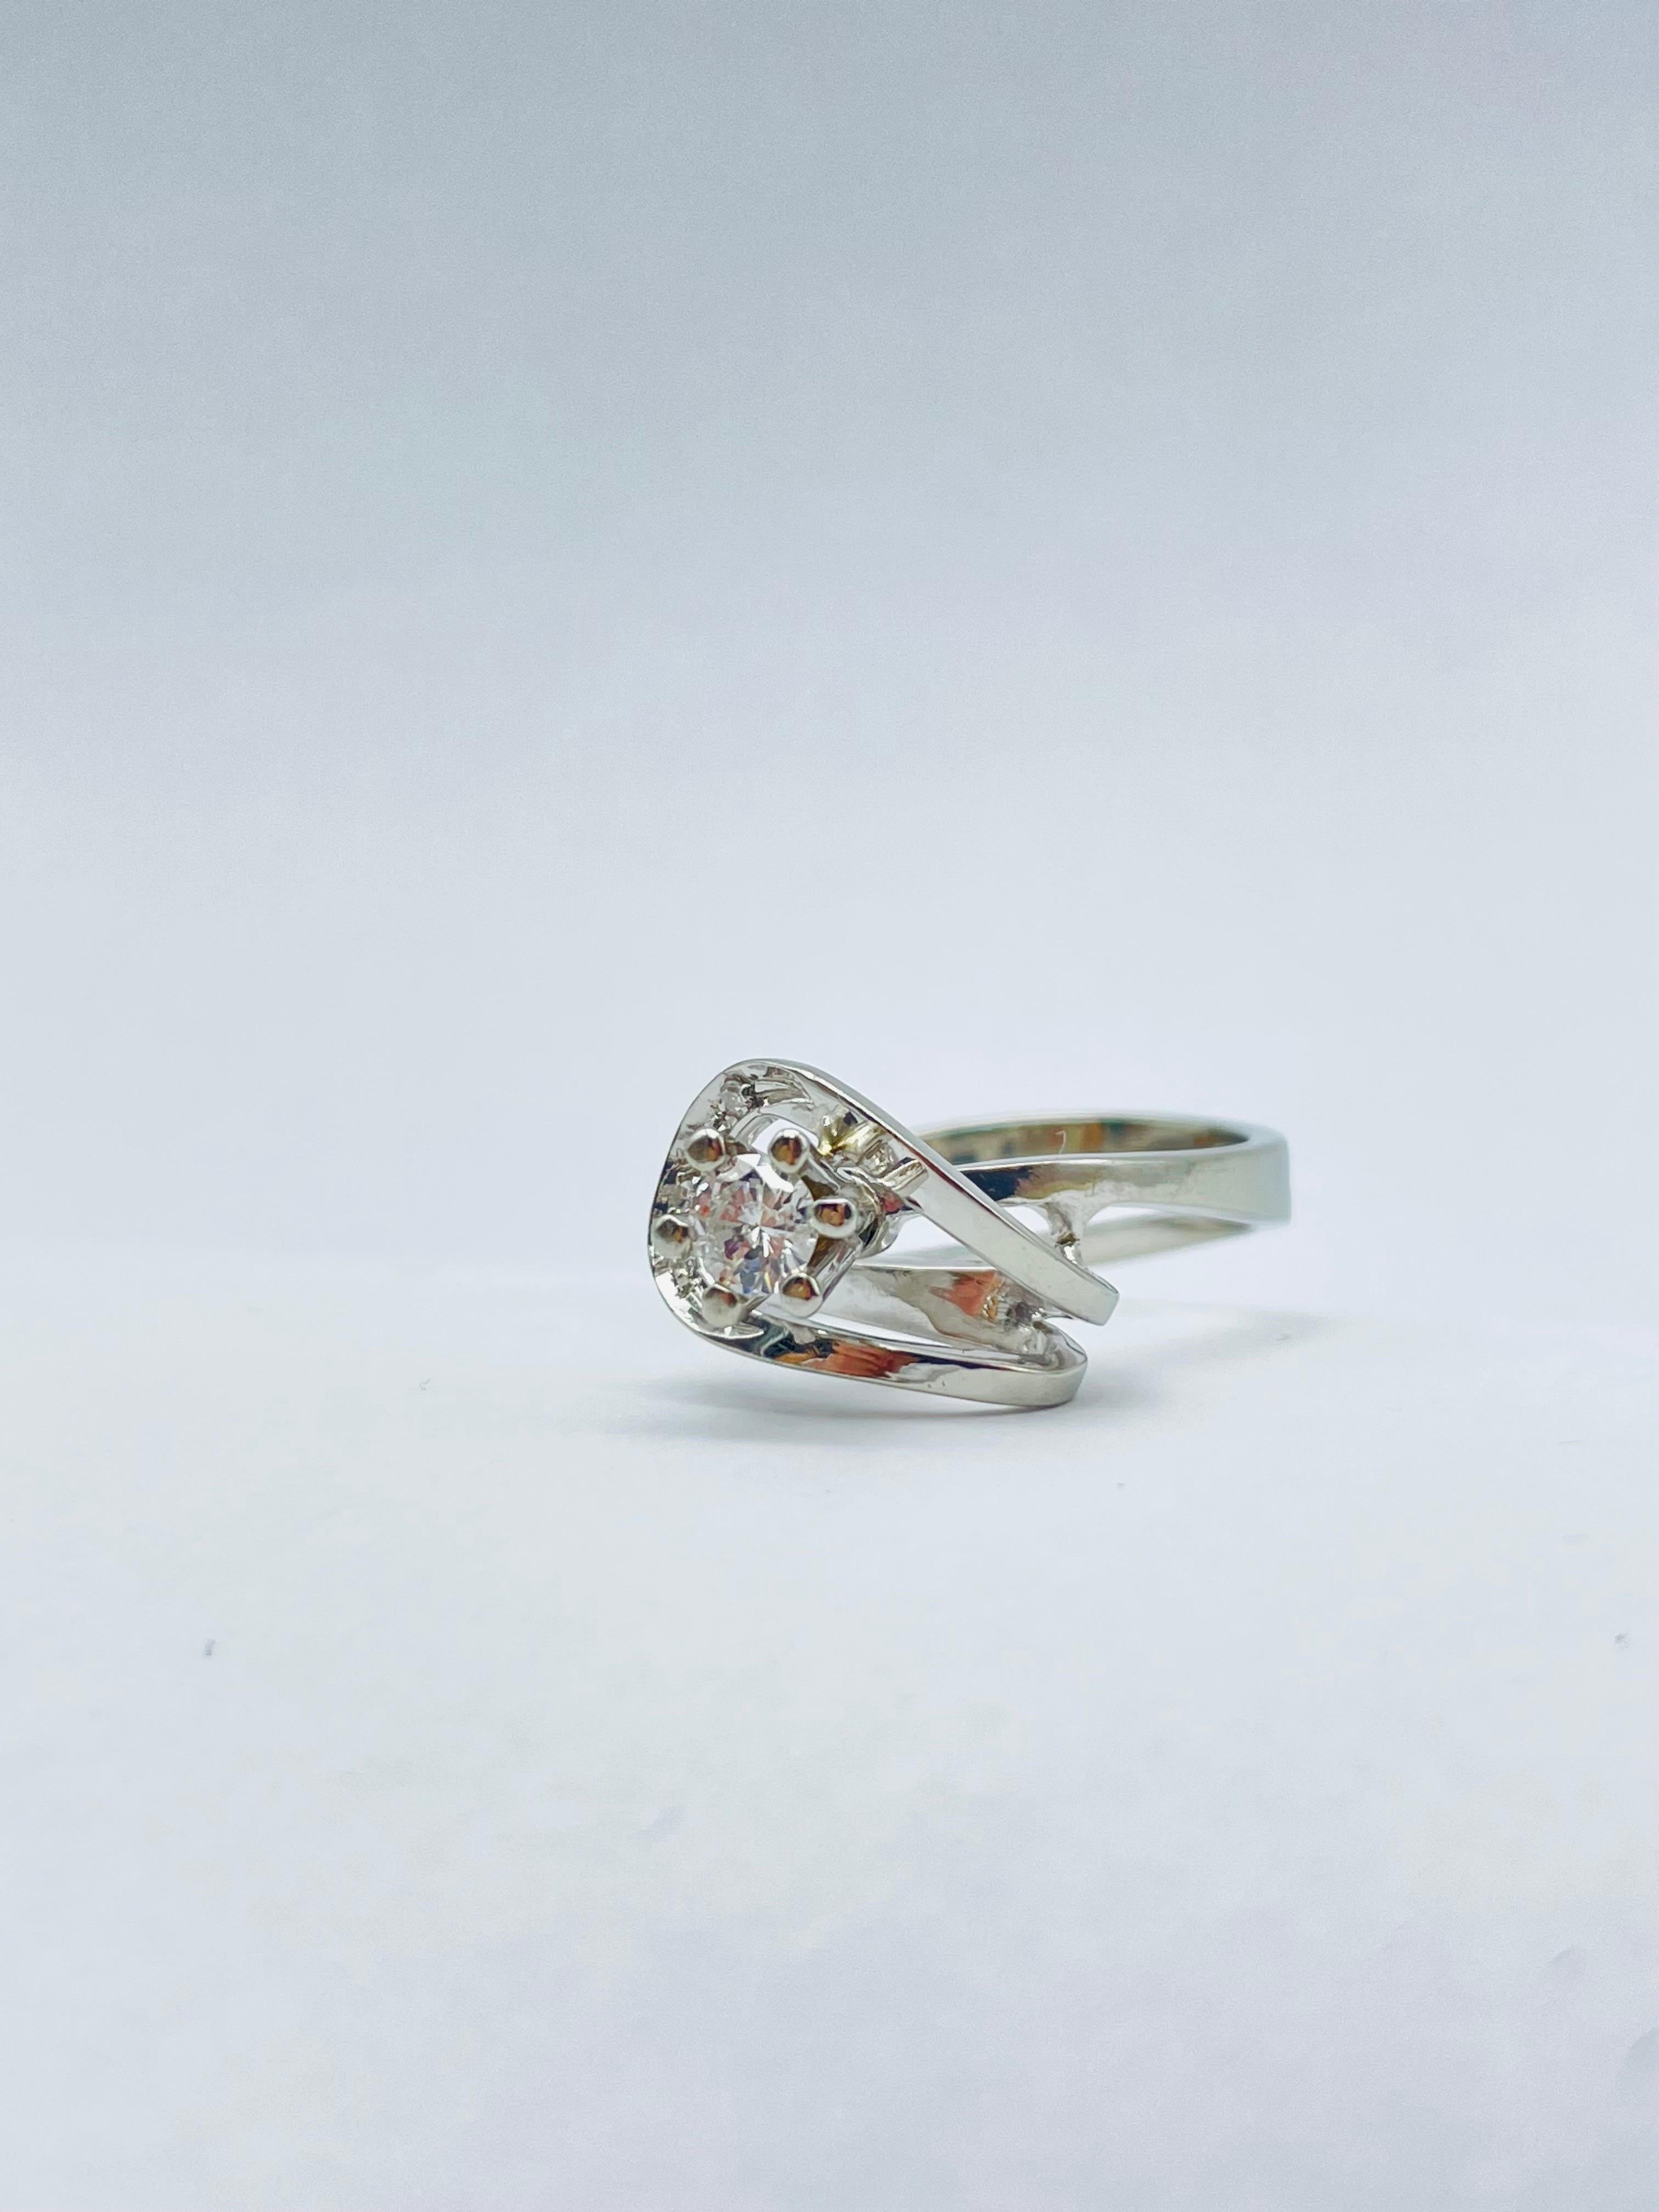 Beautiful 14k White Gold Solitaire Ring with a 0.32 Carat Diamond 7